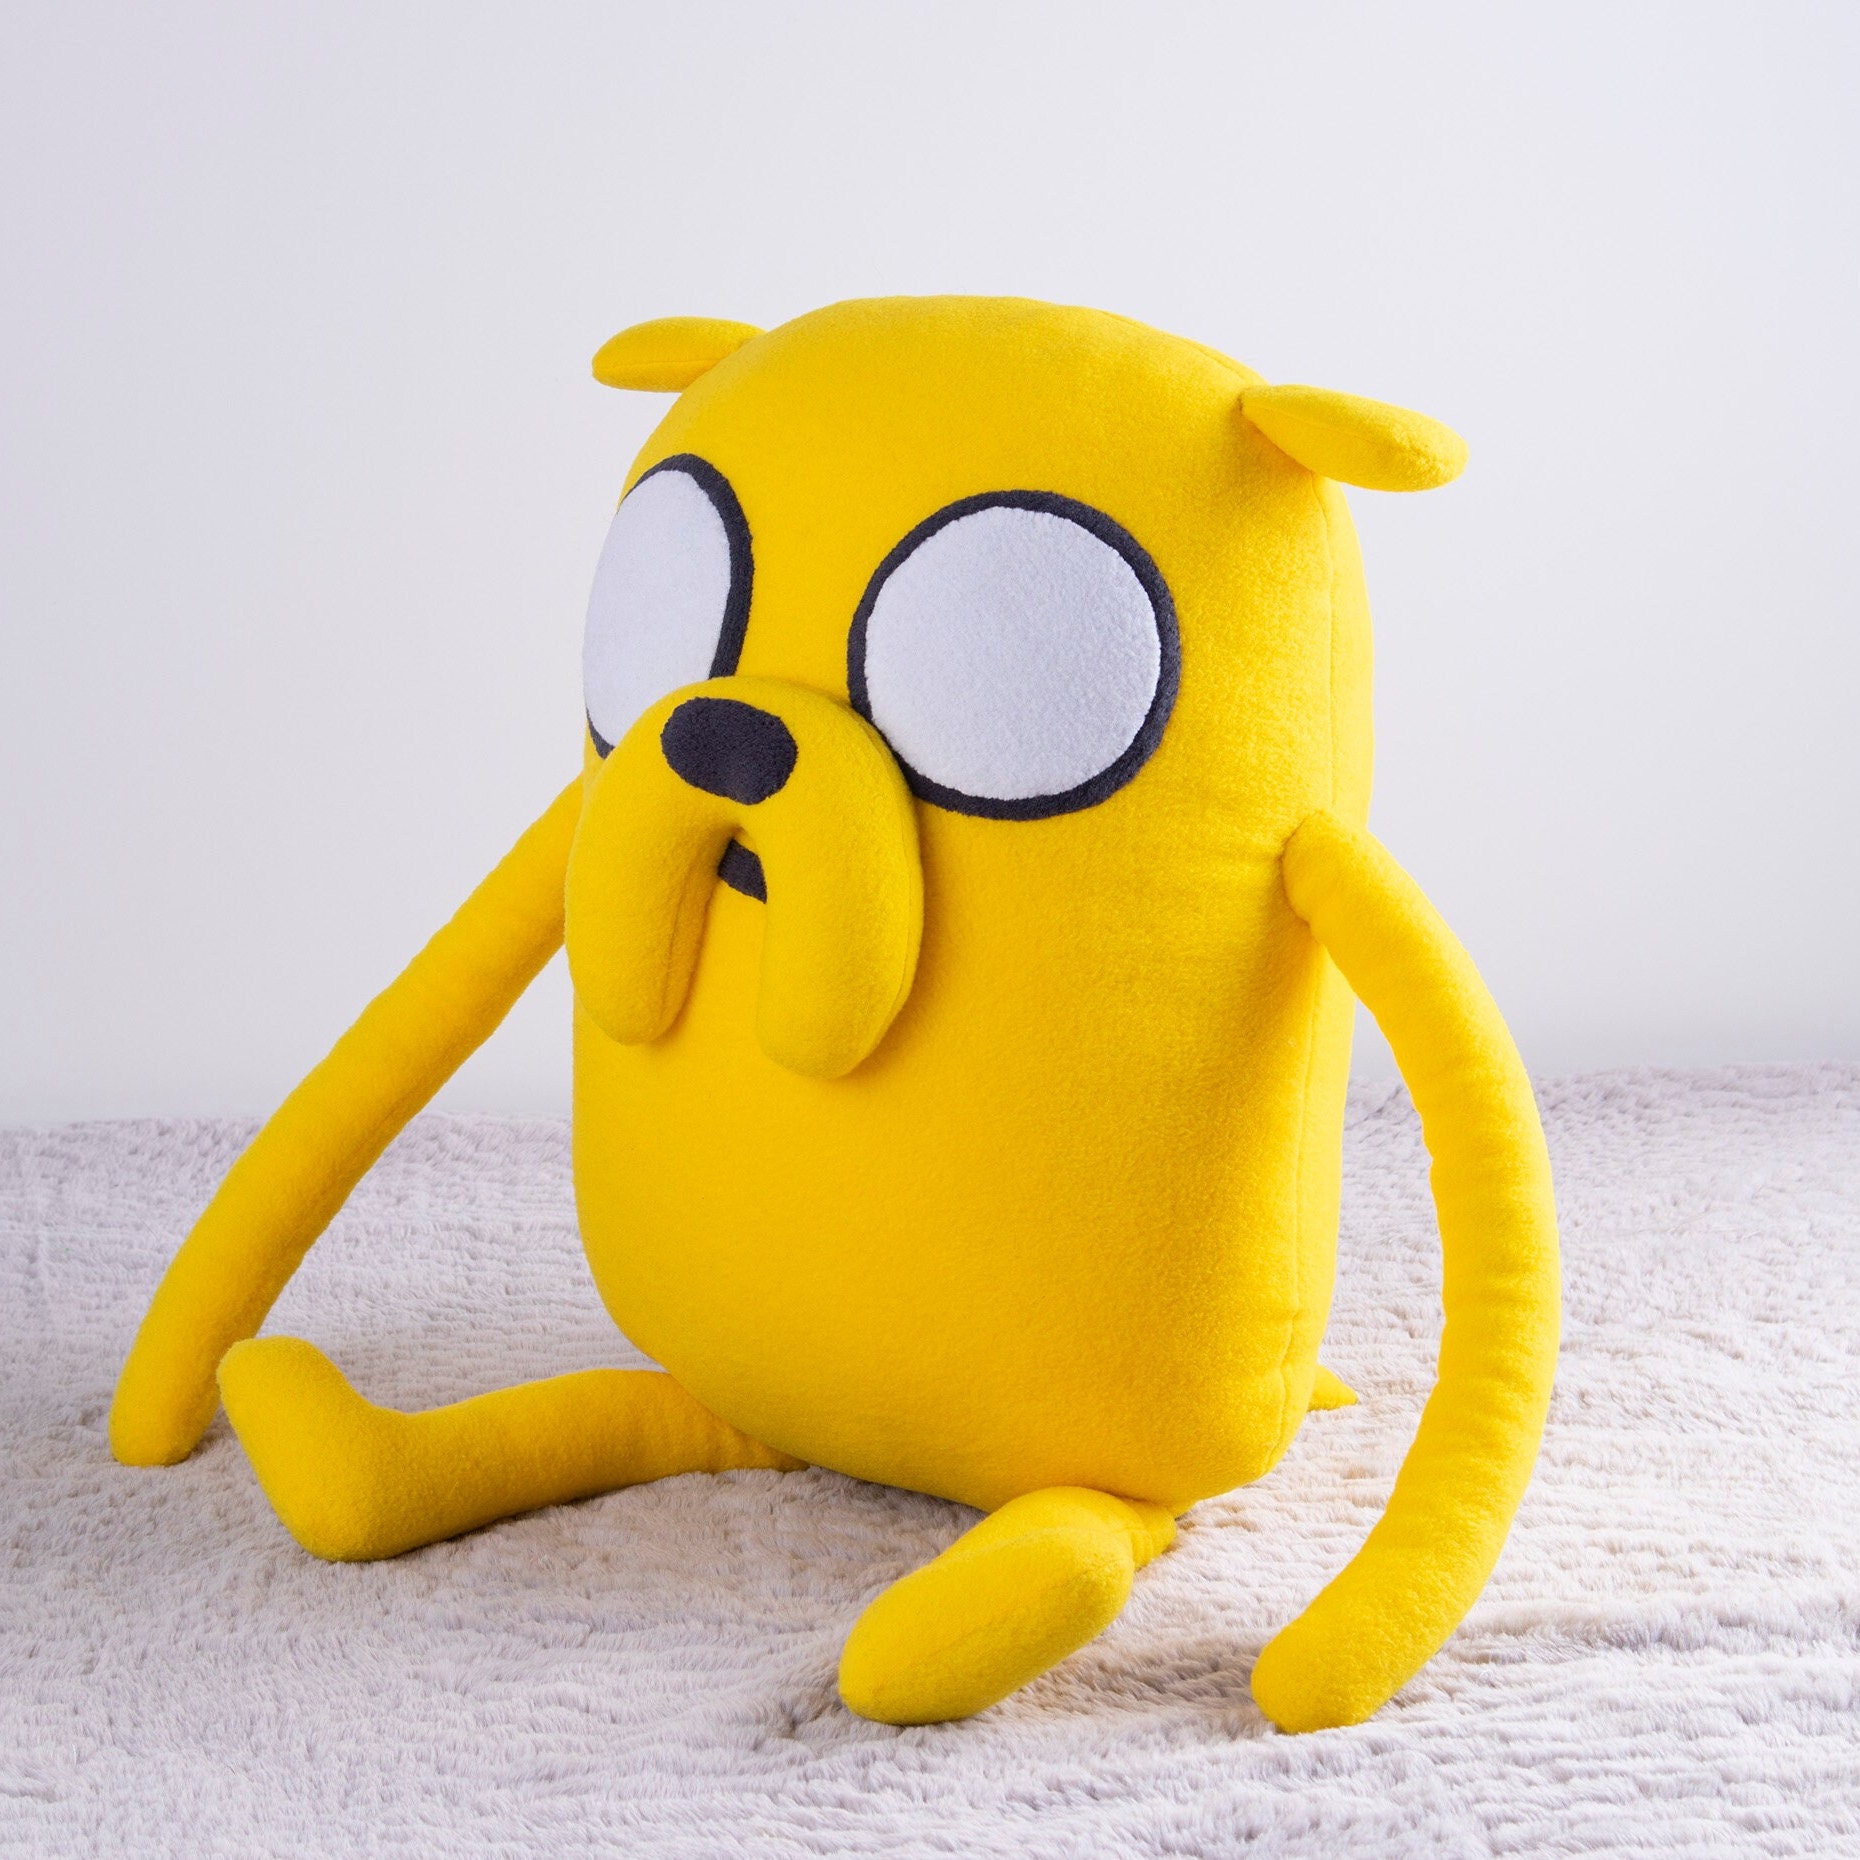 Jake the Dog Plush Toy, Jake the Dog Soft Toy, 23 in unofficial 